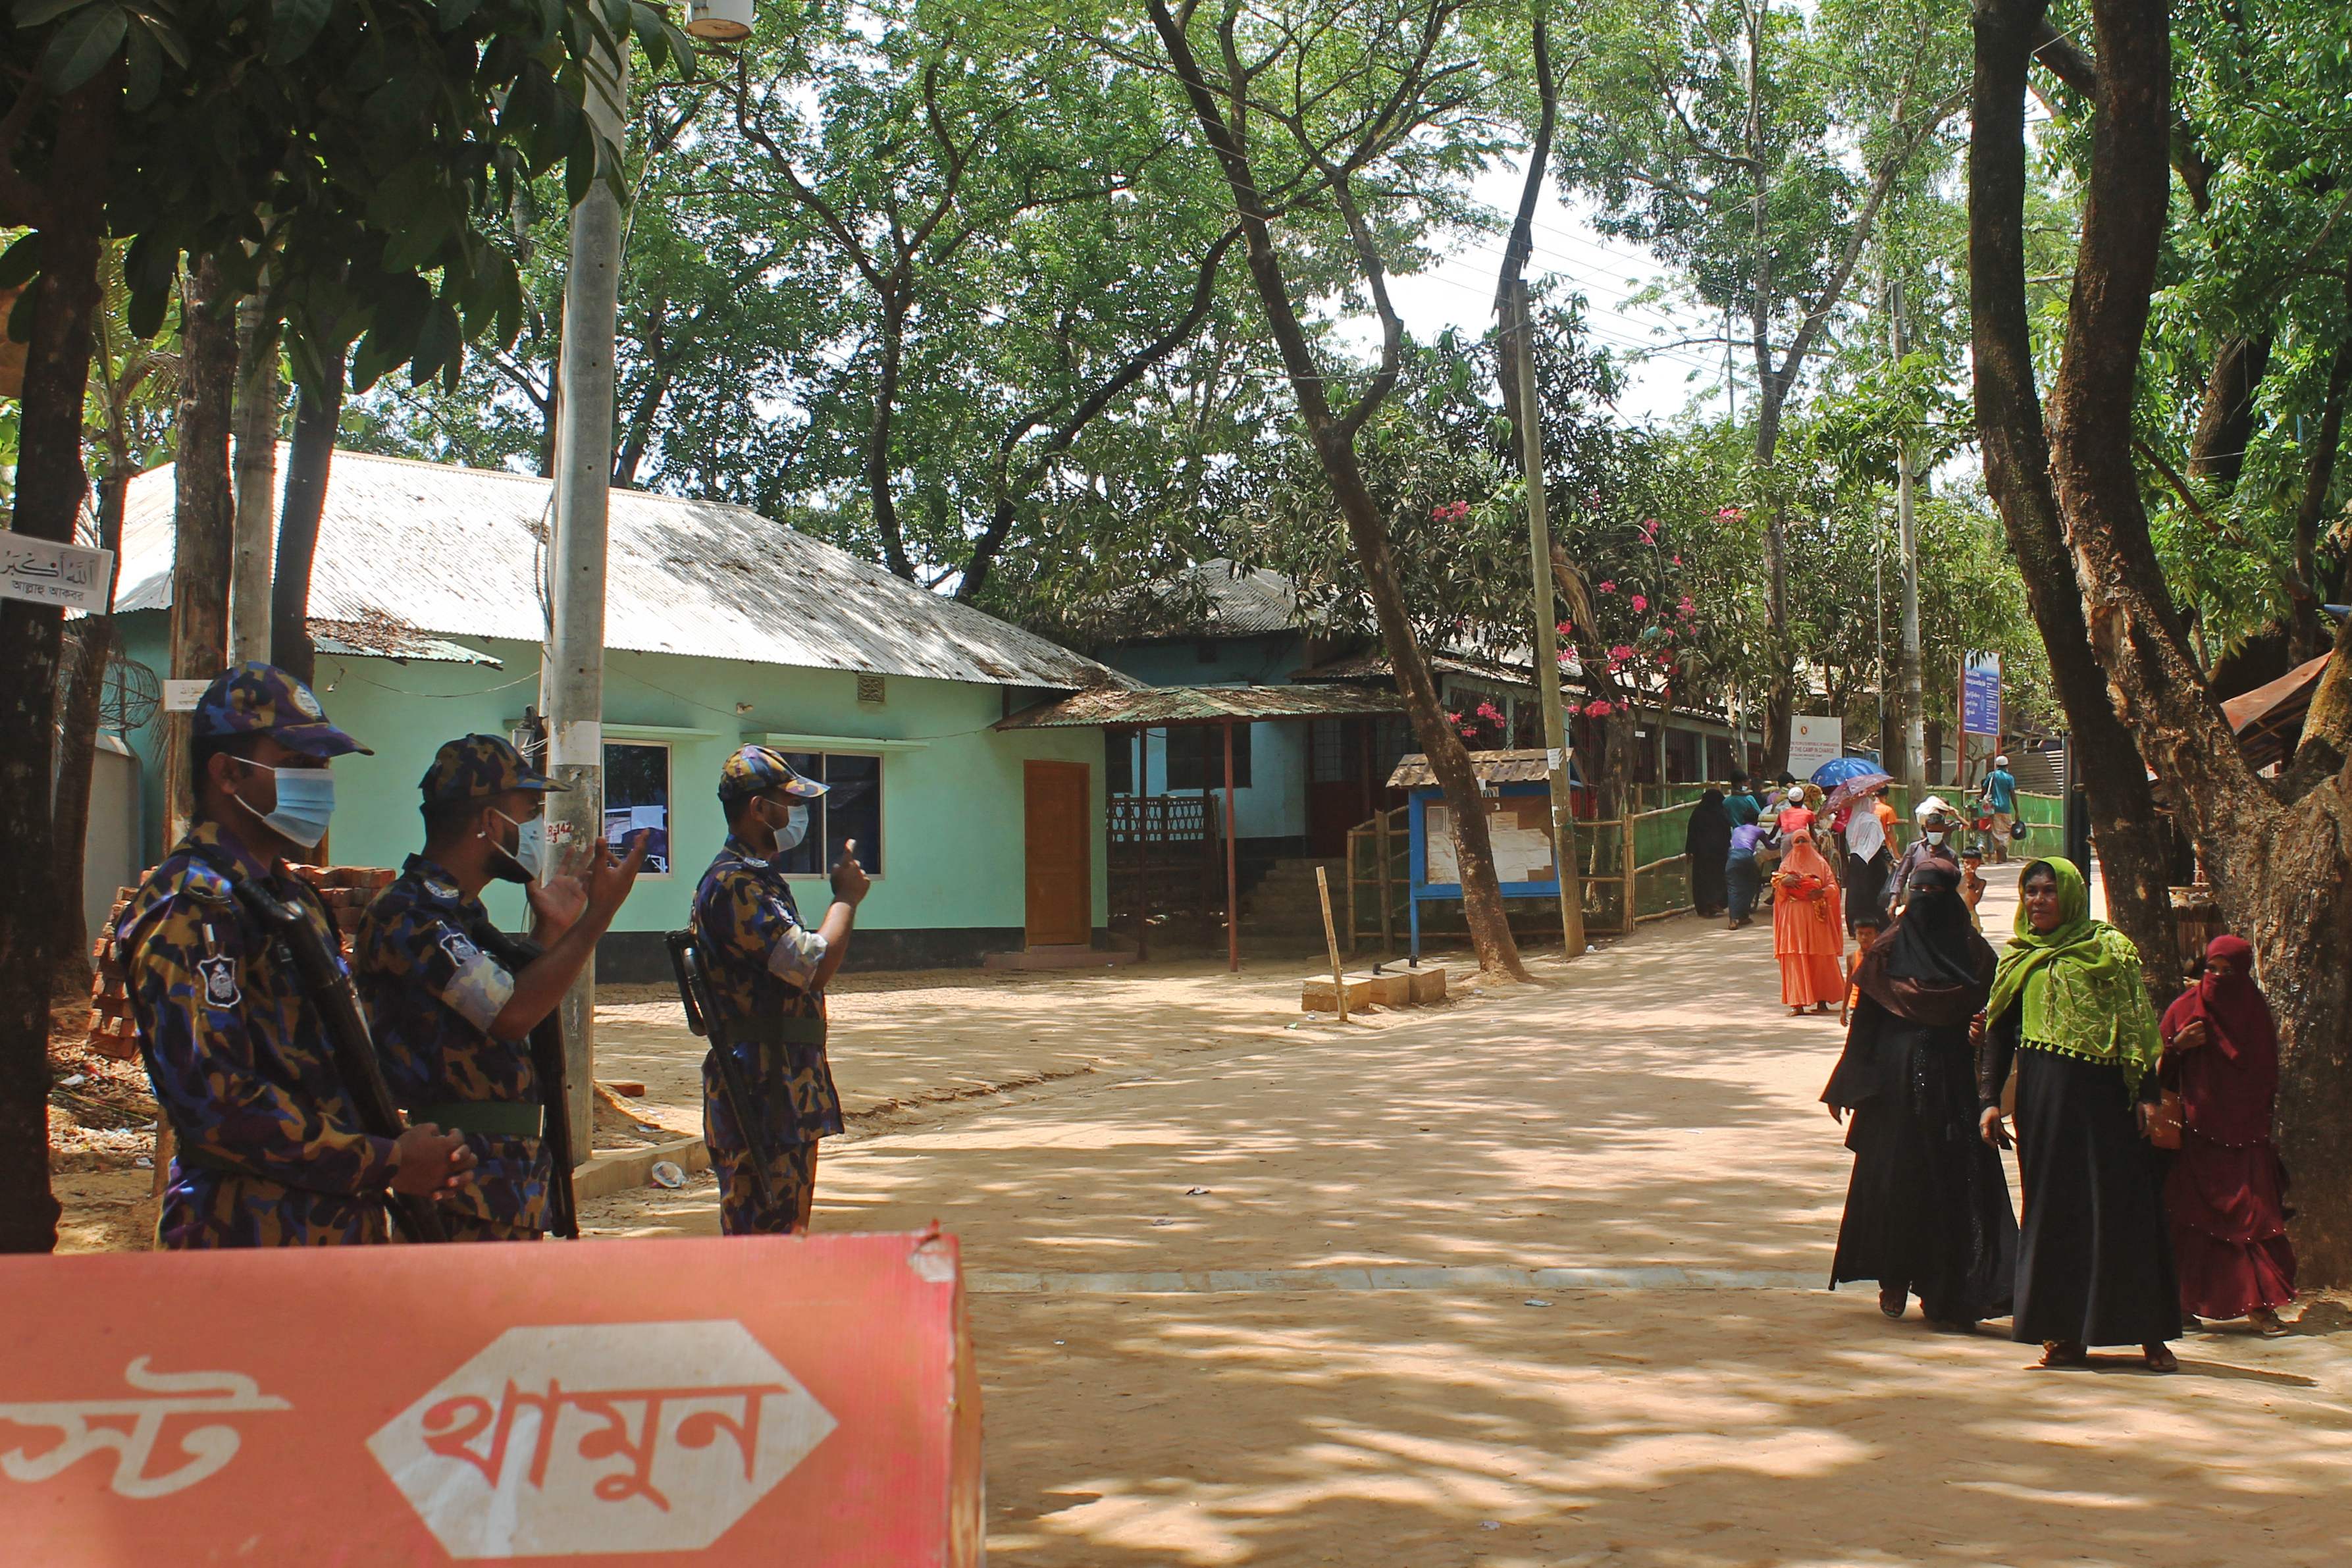 File image: Law enforcement personnel stand guard in the Kutupalong Rohingya refugee camp area where authorities imposed lockdown to contain the spread of the Covid-19 coronavirus in Ukhia (Bangladesh) on 21 May, 2021